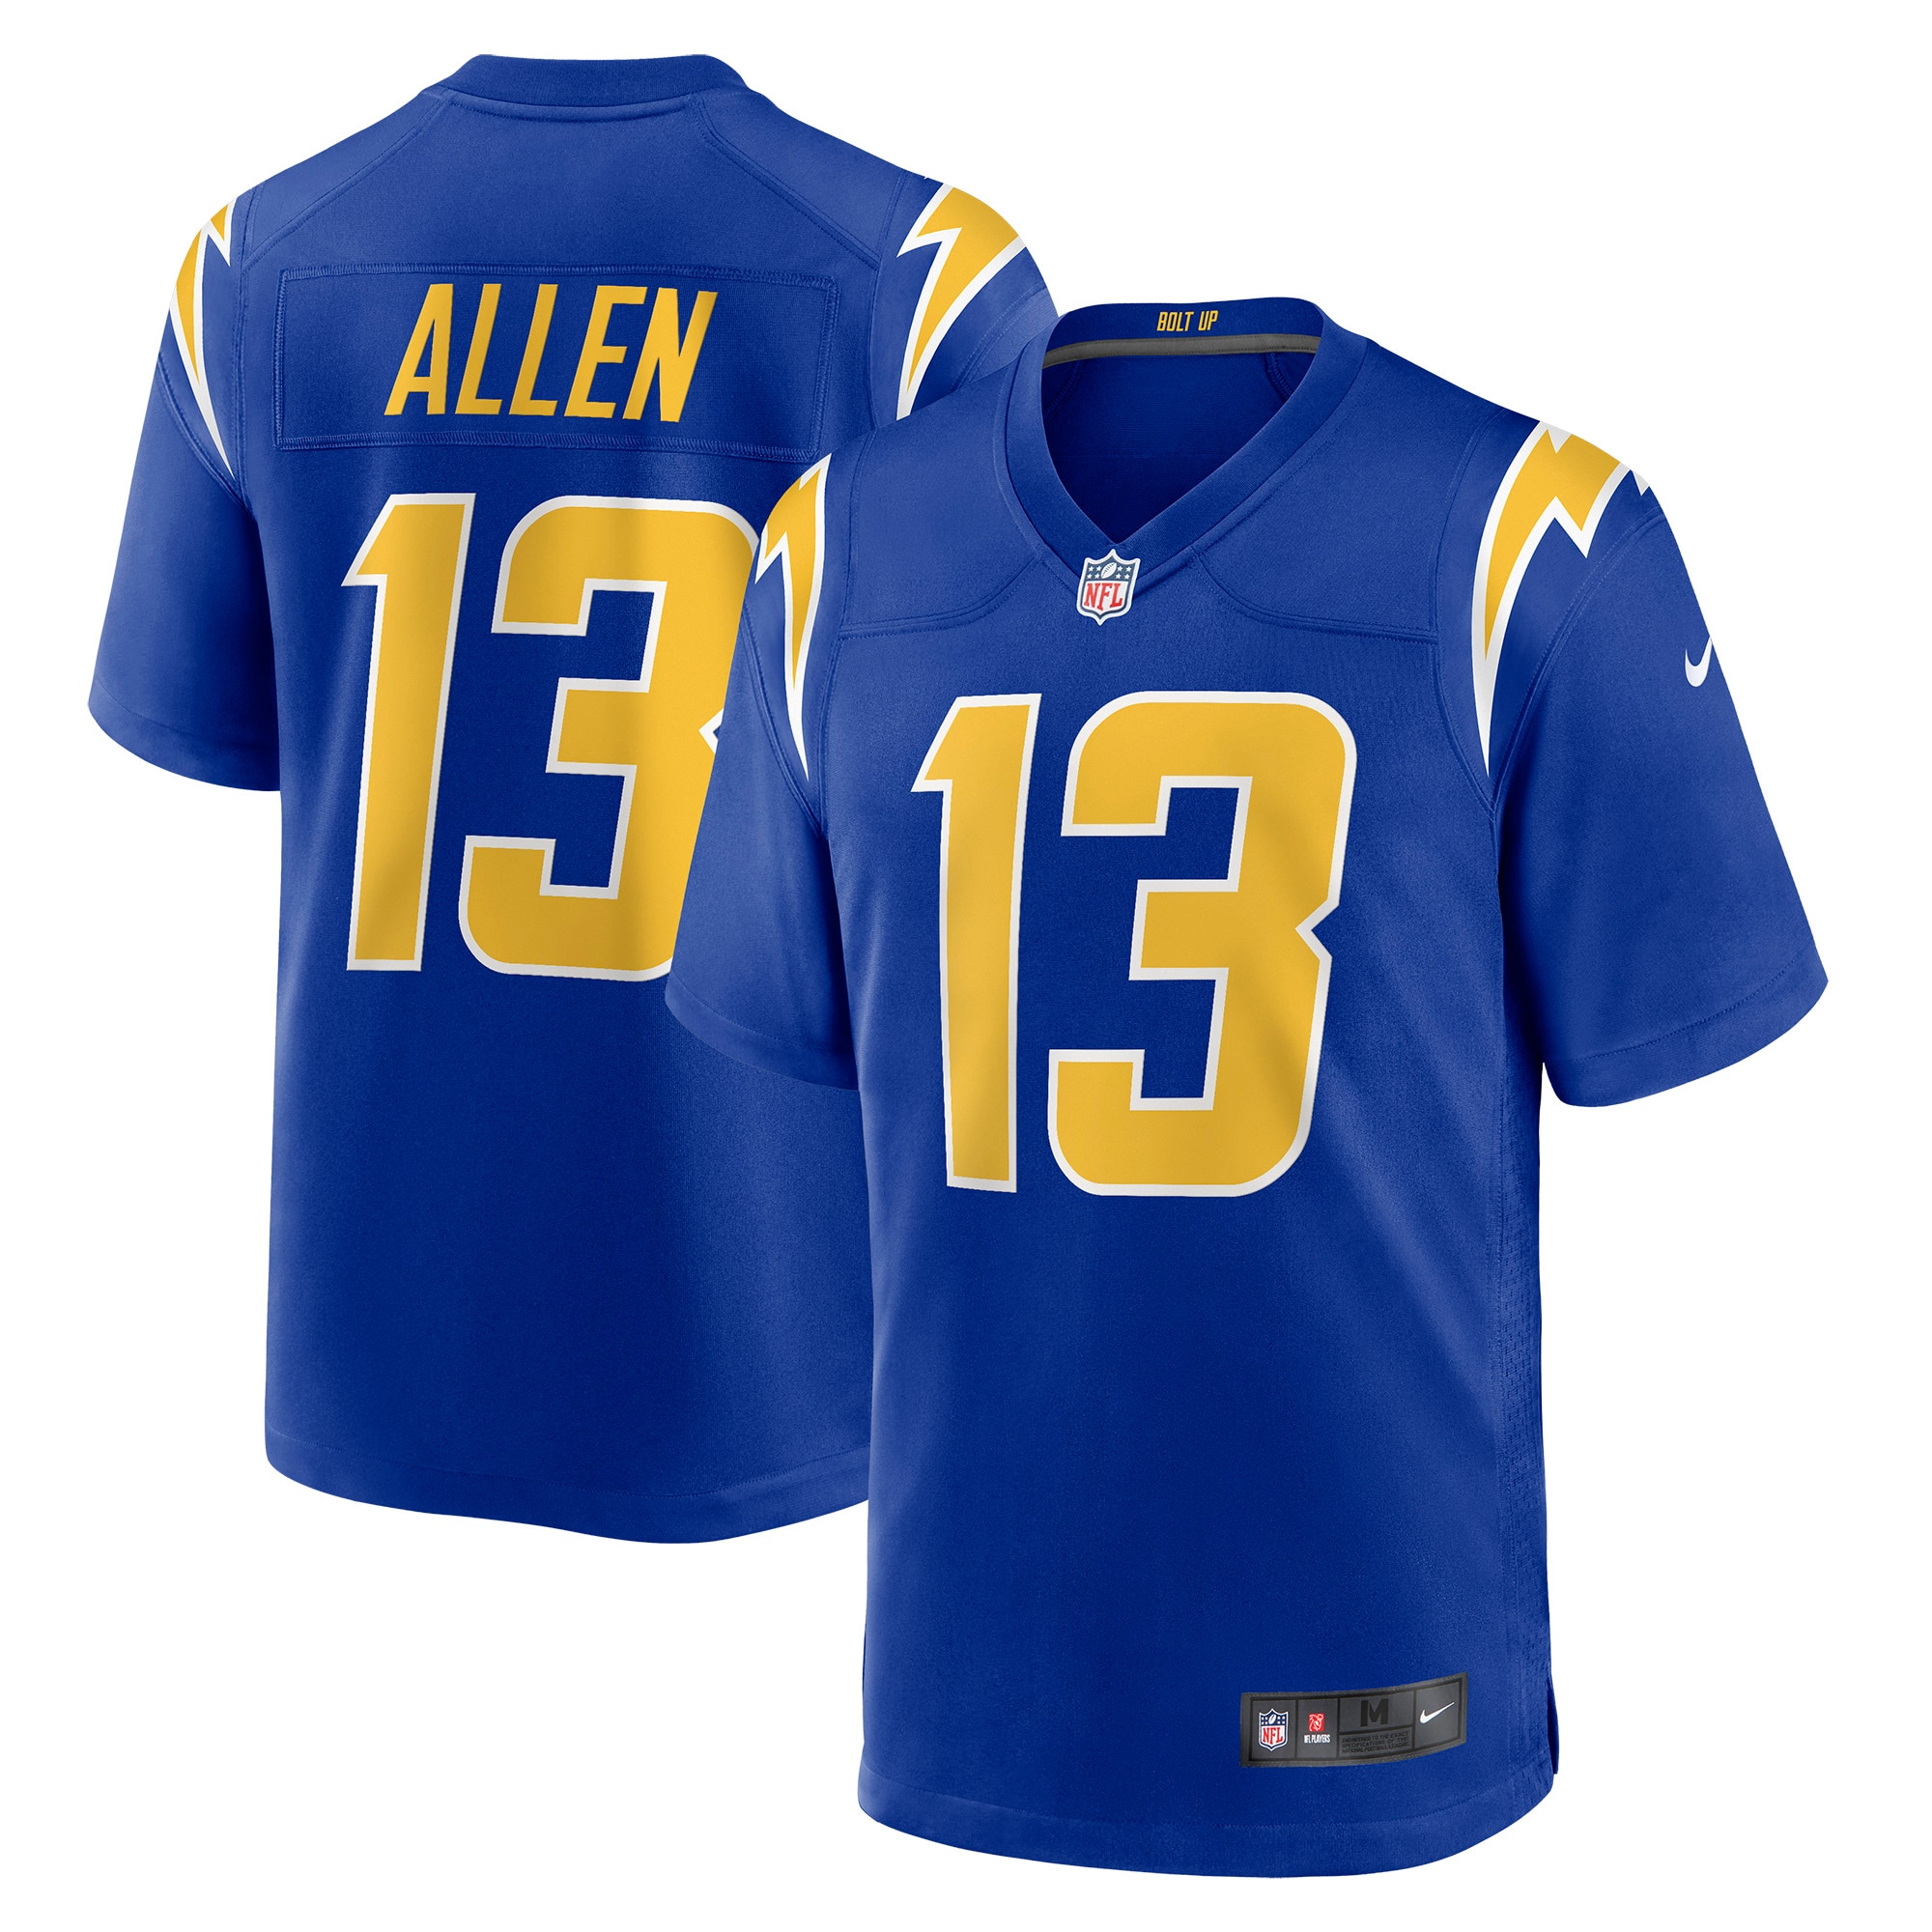 Men's Nike Keenan Allen Royal Los Angeles Chargers Game Jersey